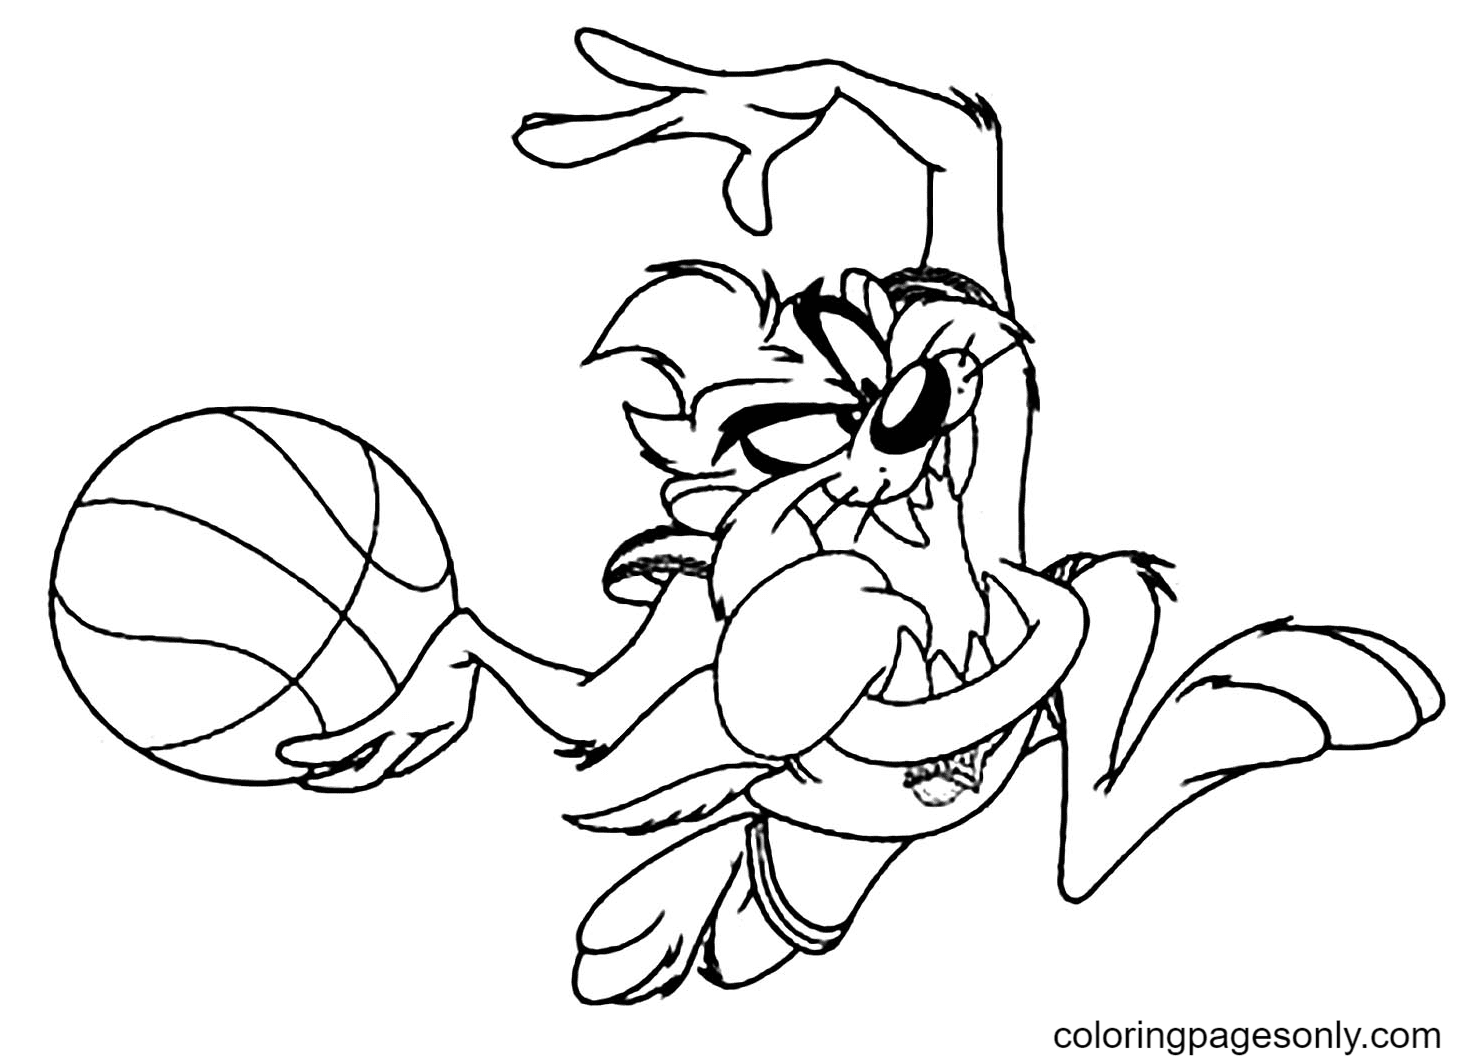 Lead the Ball to Score Coloring Page